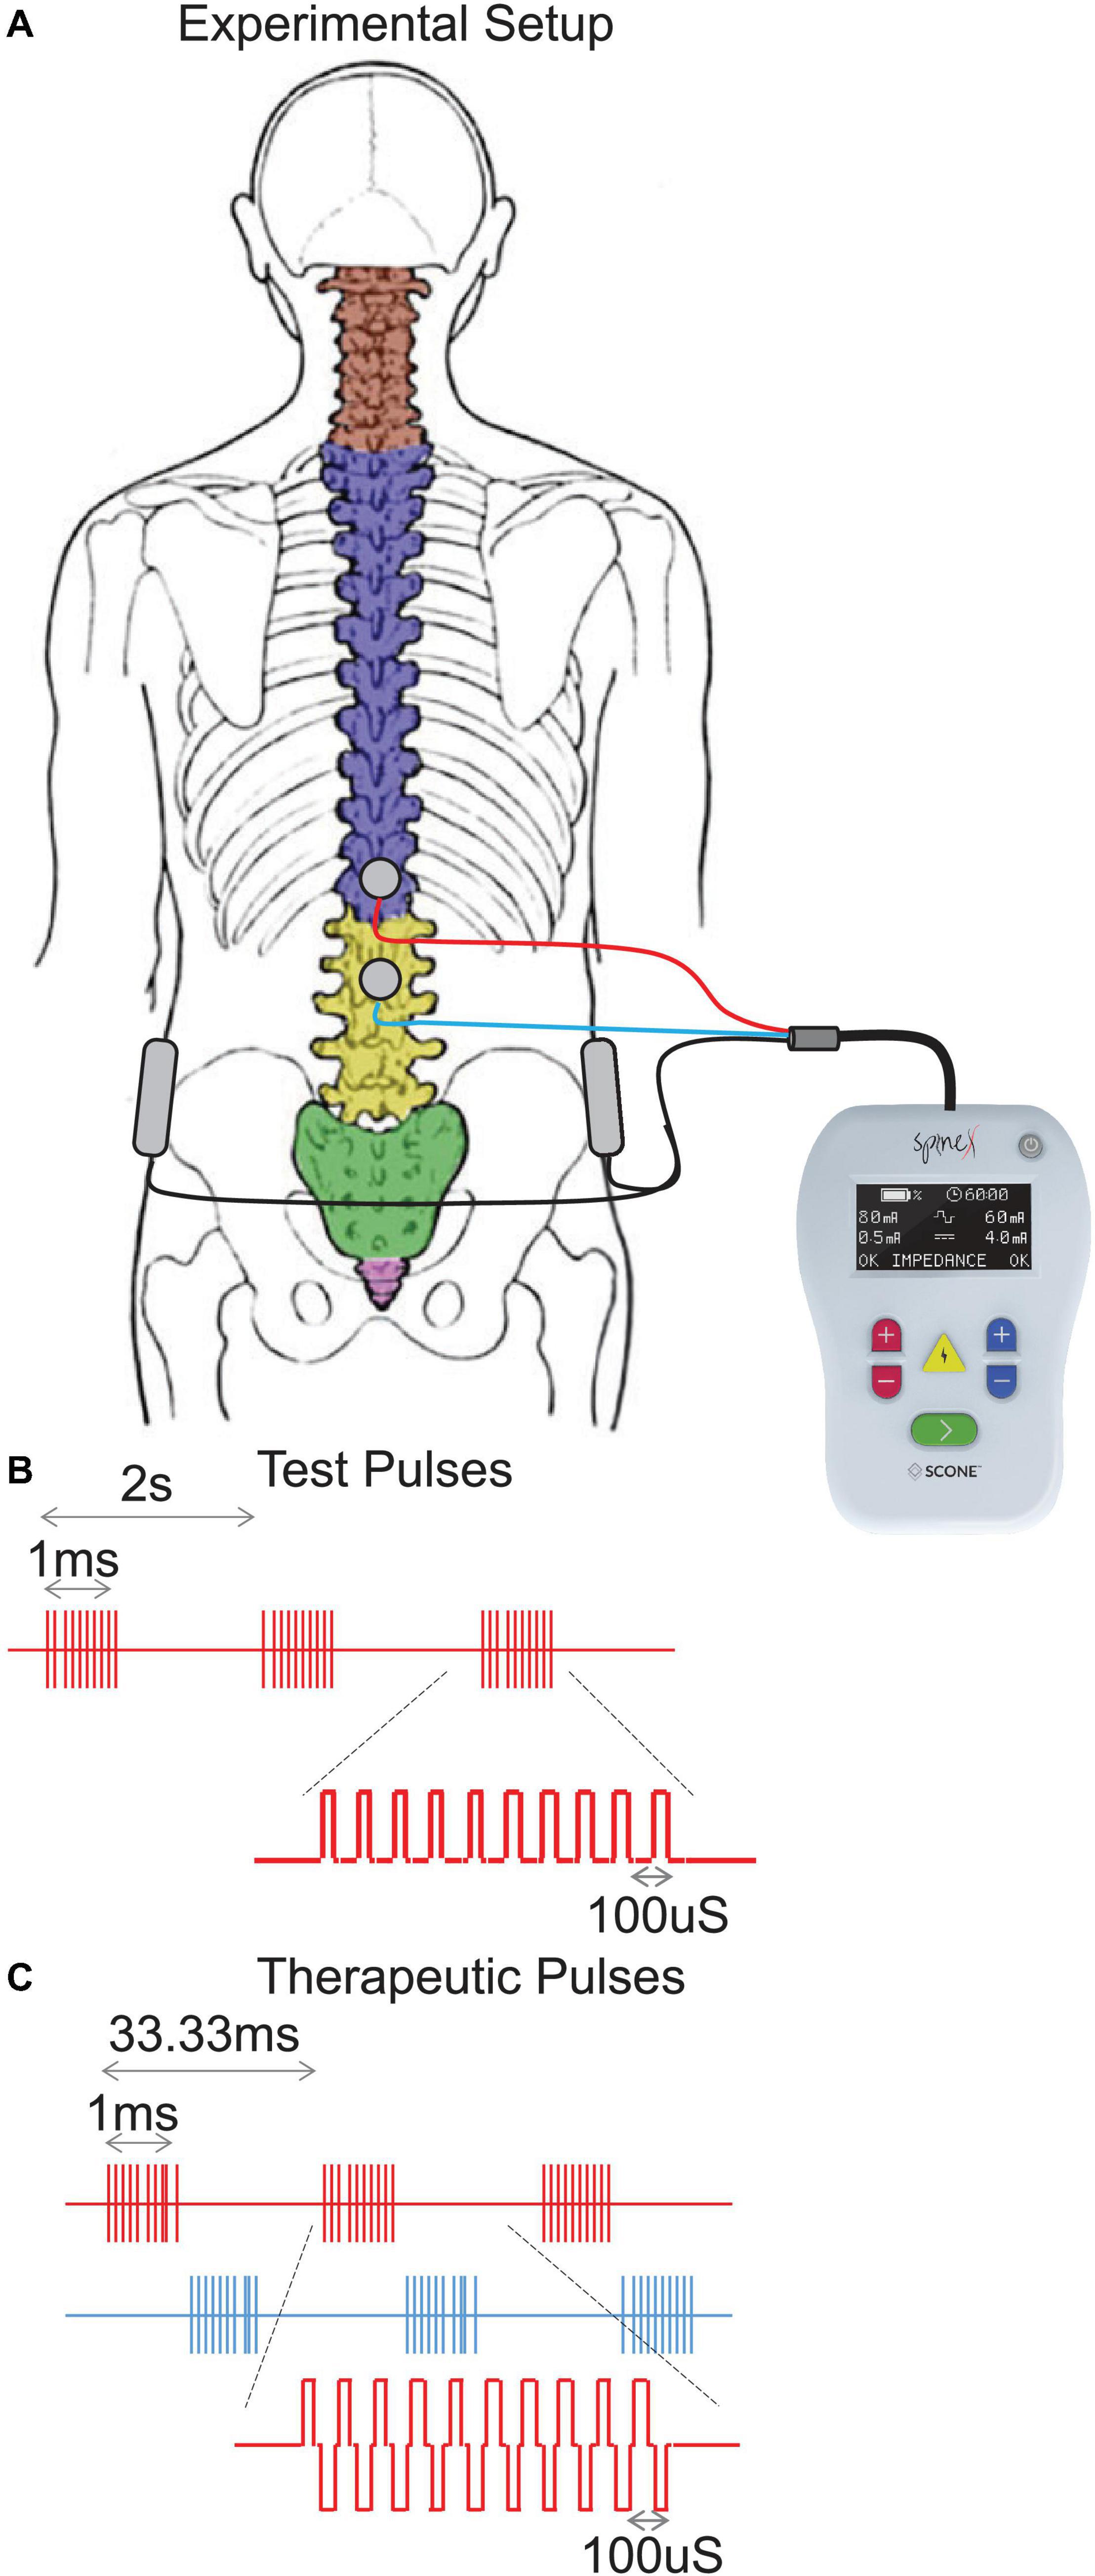 Electrical Stimulation For The Pelvic Floor - Incontinence & Prolapse